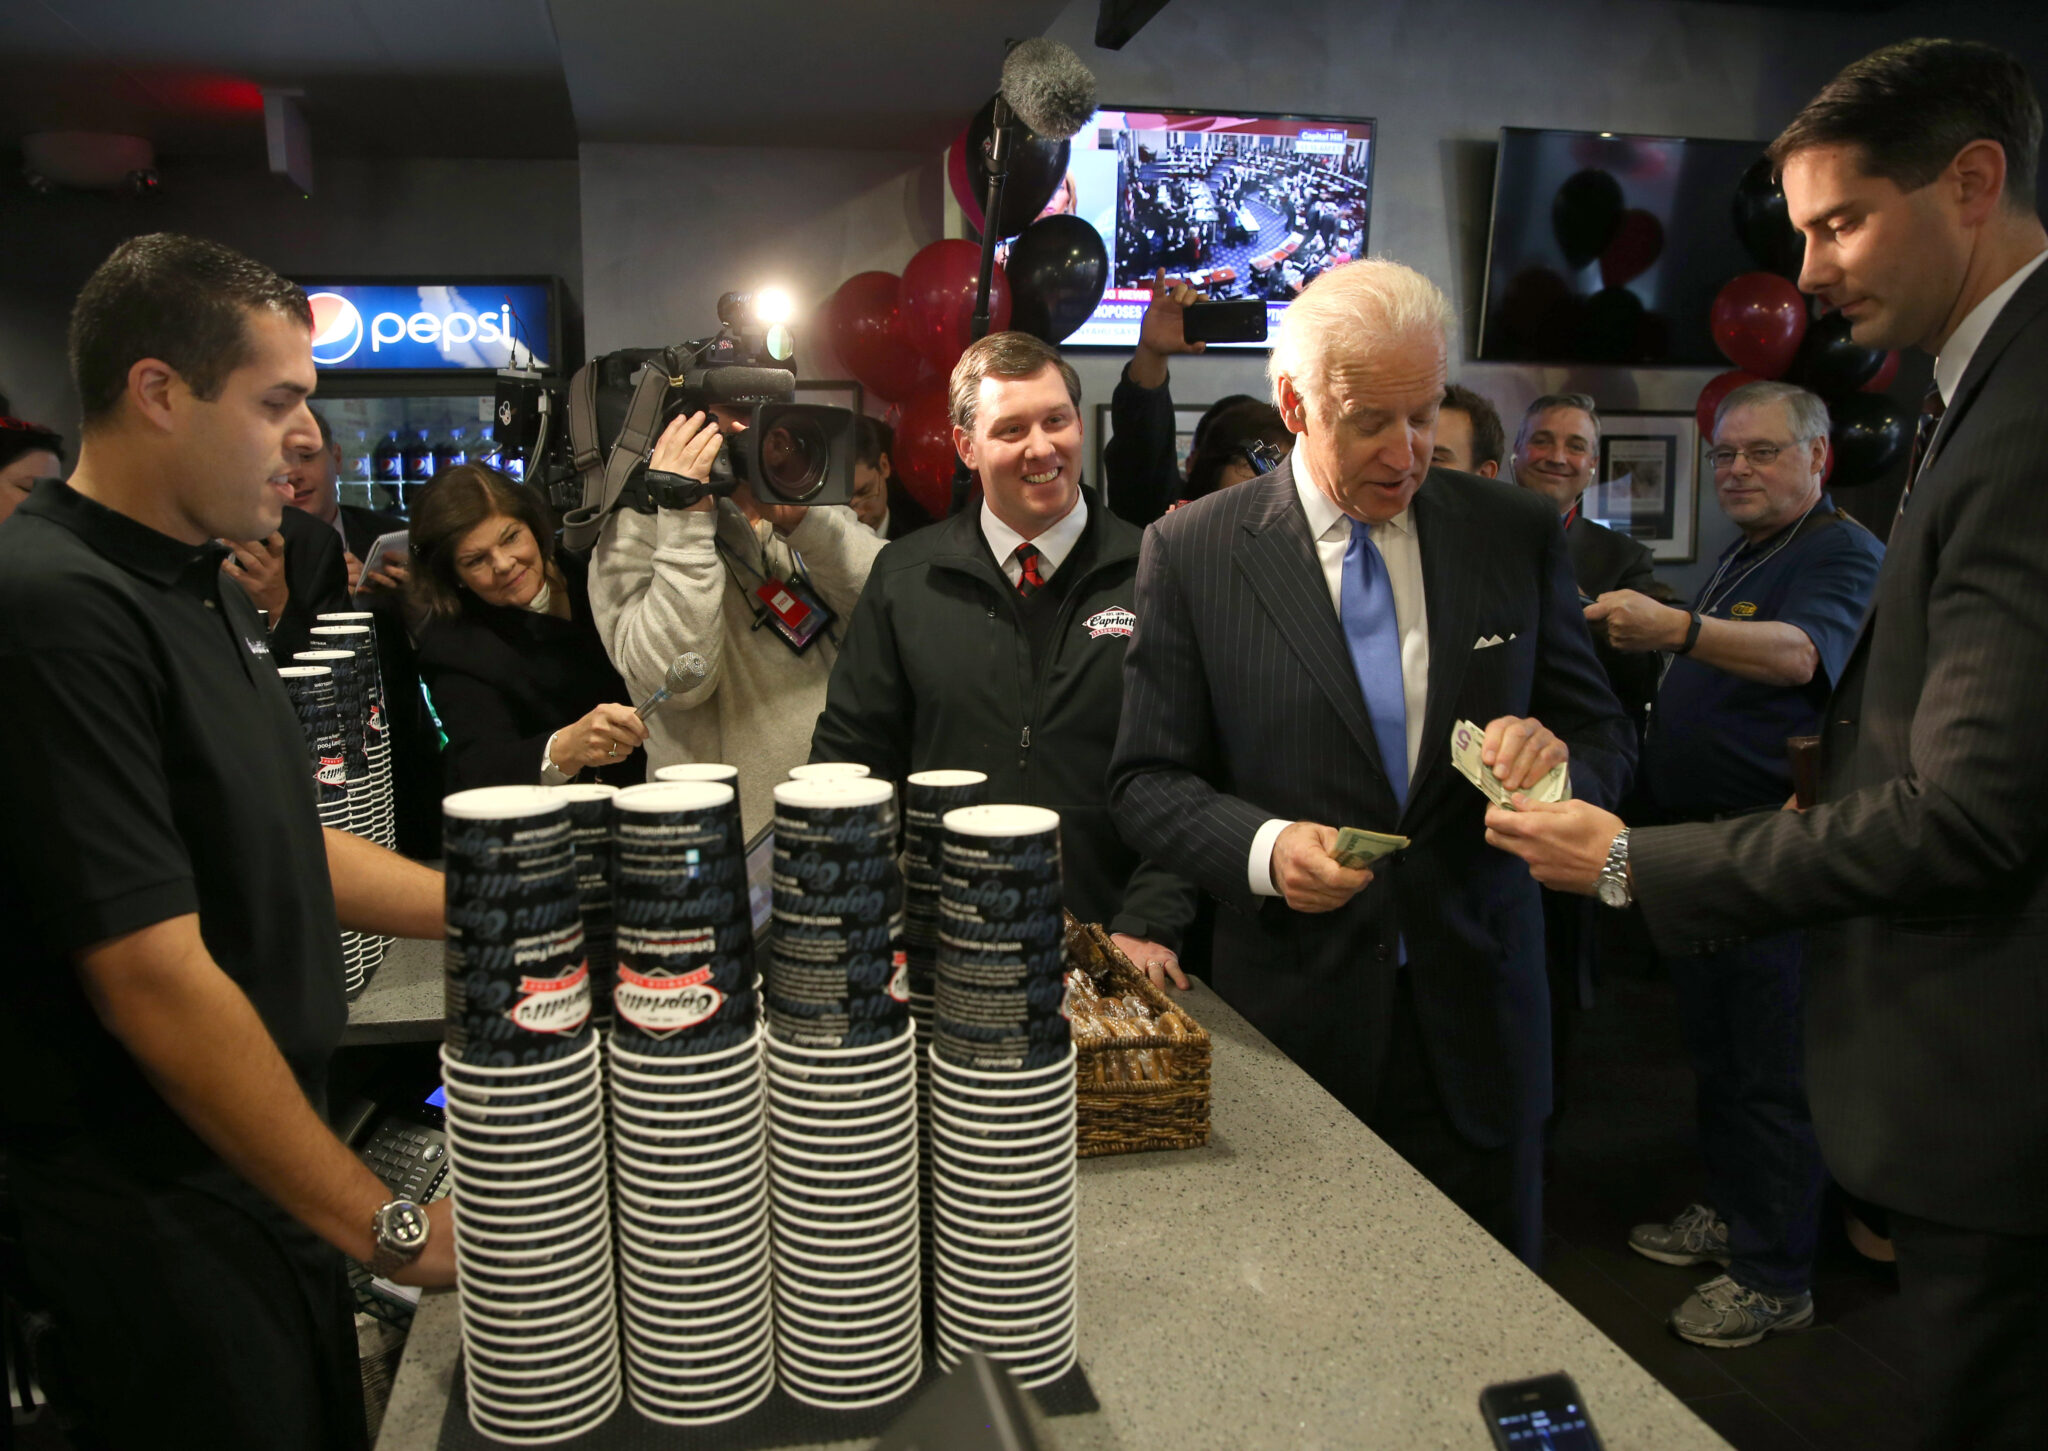 WASHINGTON, DC - NOVEMBER 21:  Vice President Joe Biden gets money to pay for his lunch at Capriotti's sandwhich shop, on November 21, 2013 in Washington, DC.  Capriotti's is a Delaware based Italian hoagie chain and a favorite of the Vice President.  (Photo by Mark Wilson/Getty Images)